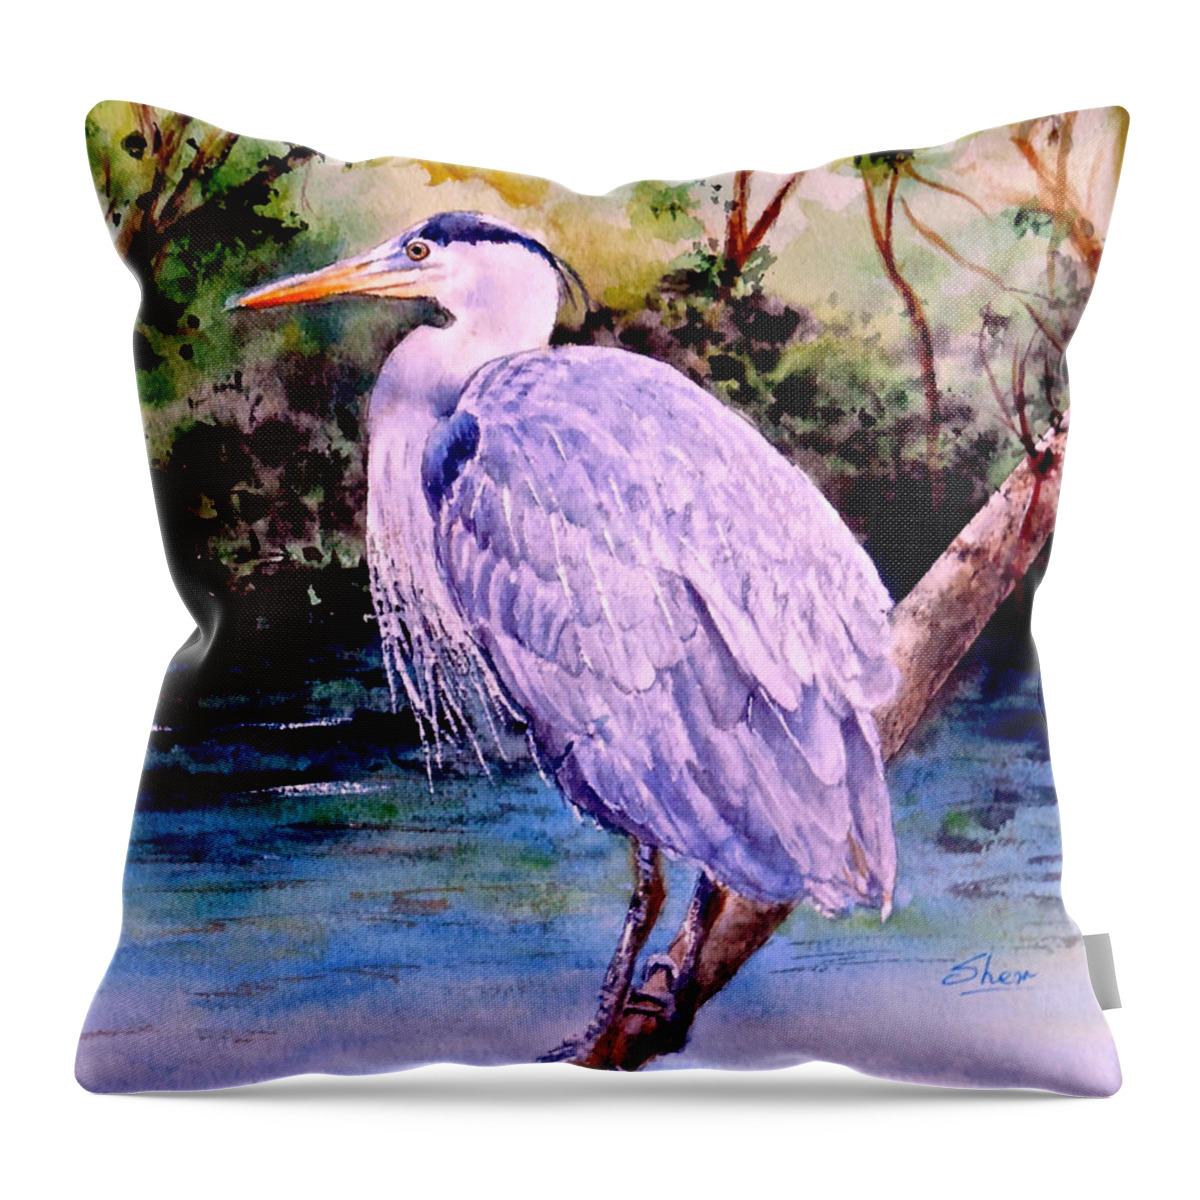 Watercolour Painting Throw Pillow featuring the painting On the Lookout by Sher Nasser